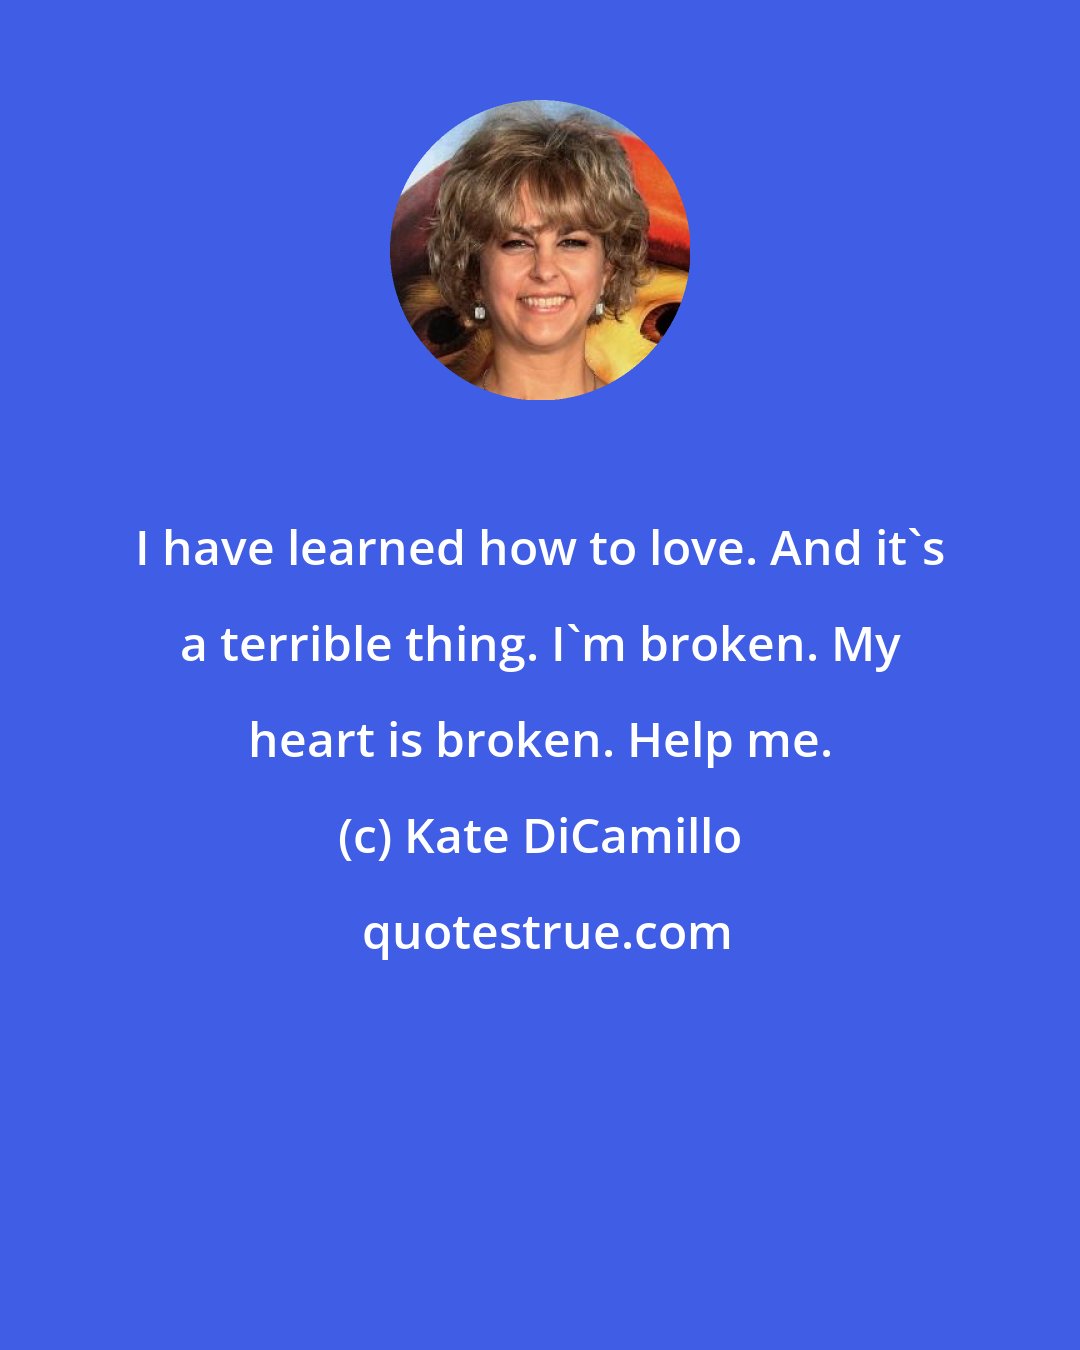 Kate DiCamillo: I have learned how to love. And it's a terrible thing. I'm broken. My heart is broken. Help me.